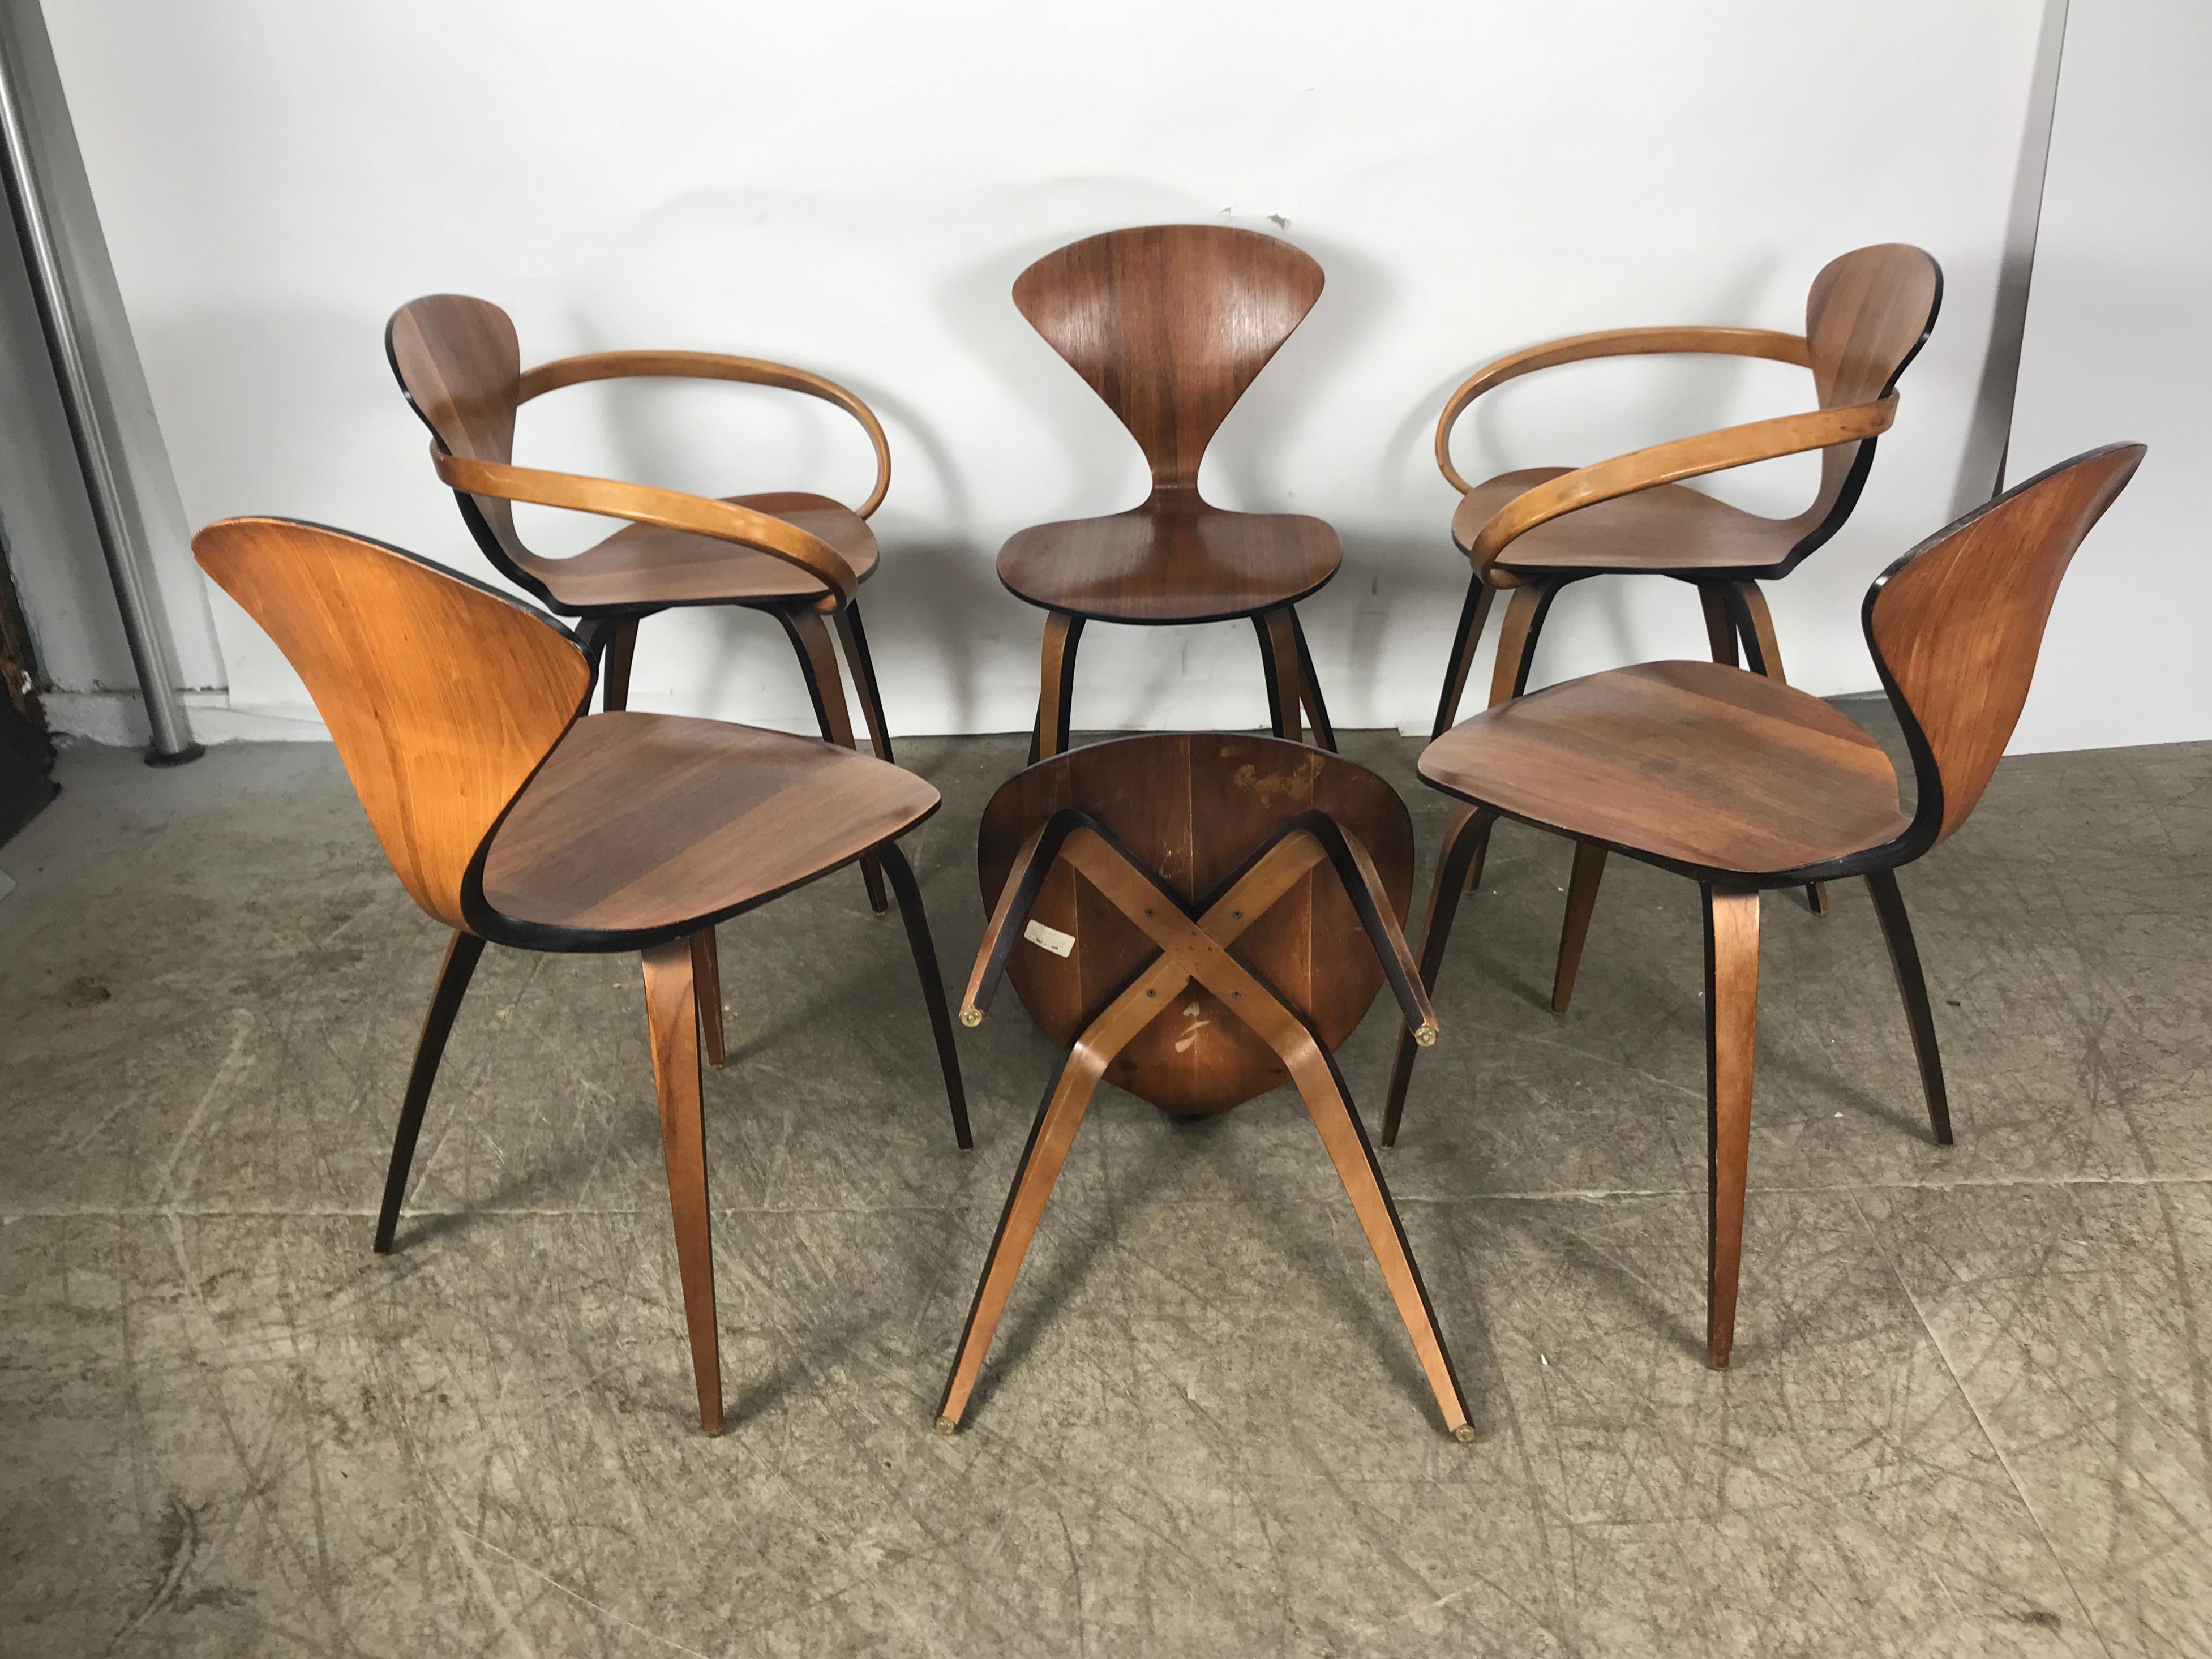 Mid-20th Century Classic Set of 6 Dining Chairs by Norman Cherner for Plycraft, Pretzel Captain